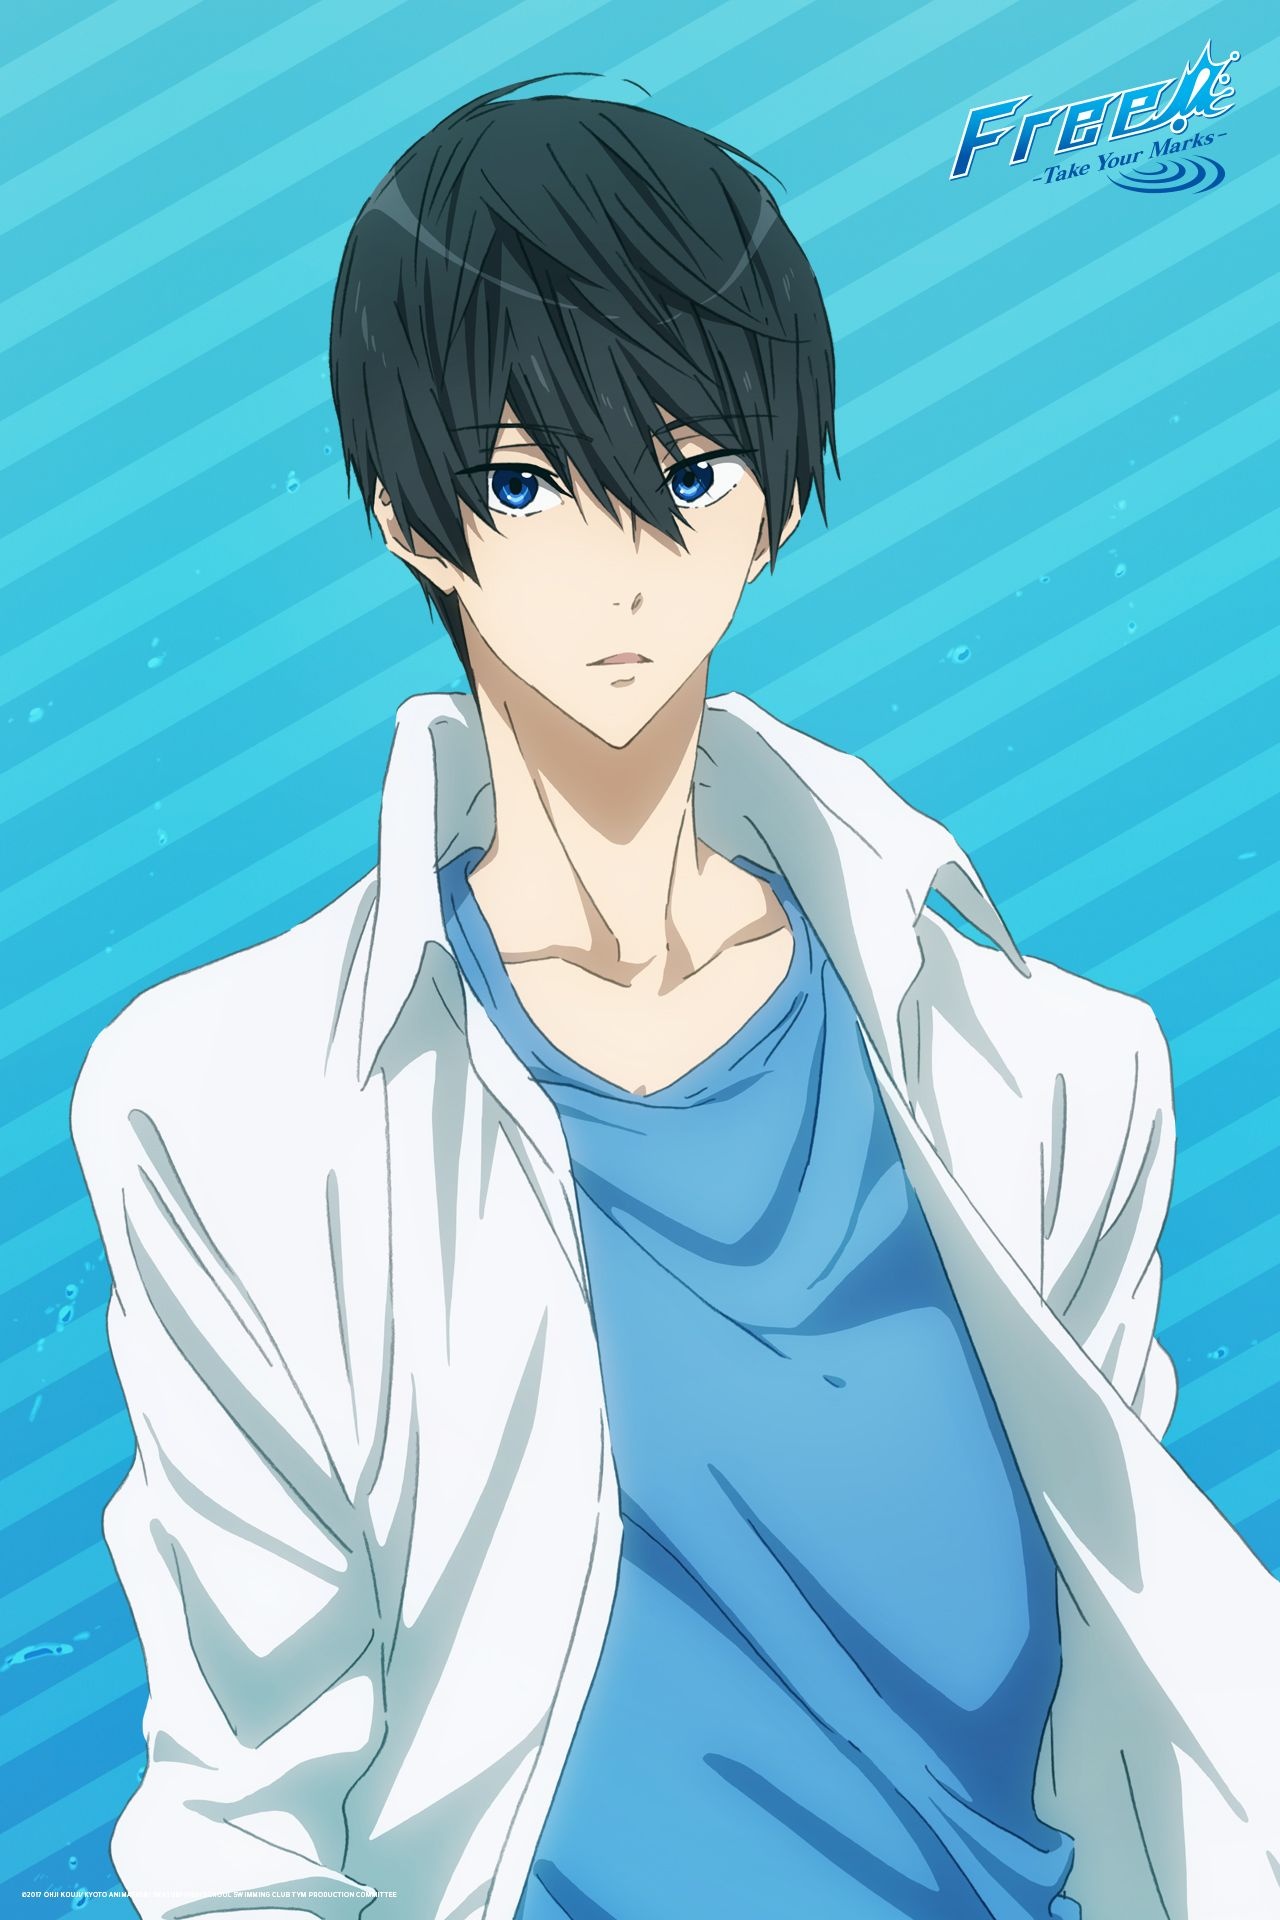 Free!, HD wallpapers, Free anime backgrounds, Anime series, 1280x1920 HD Handy